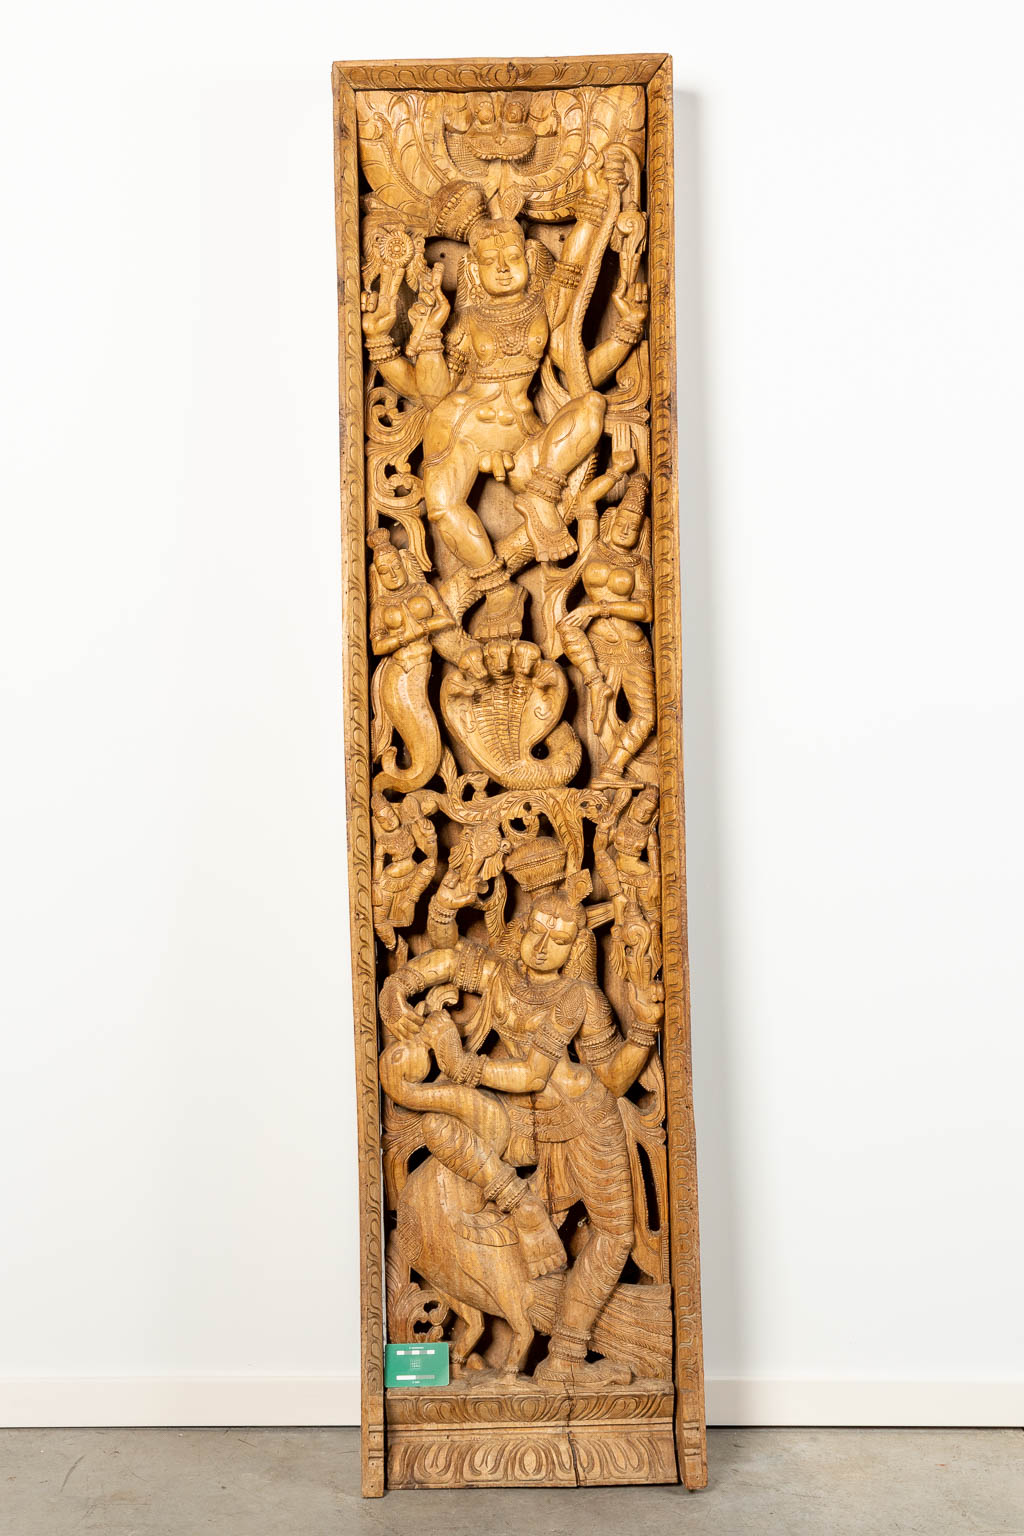 A large Balinese wood sculpture. 